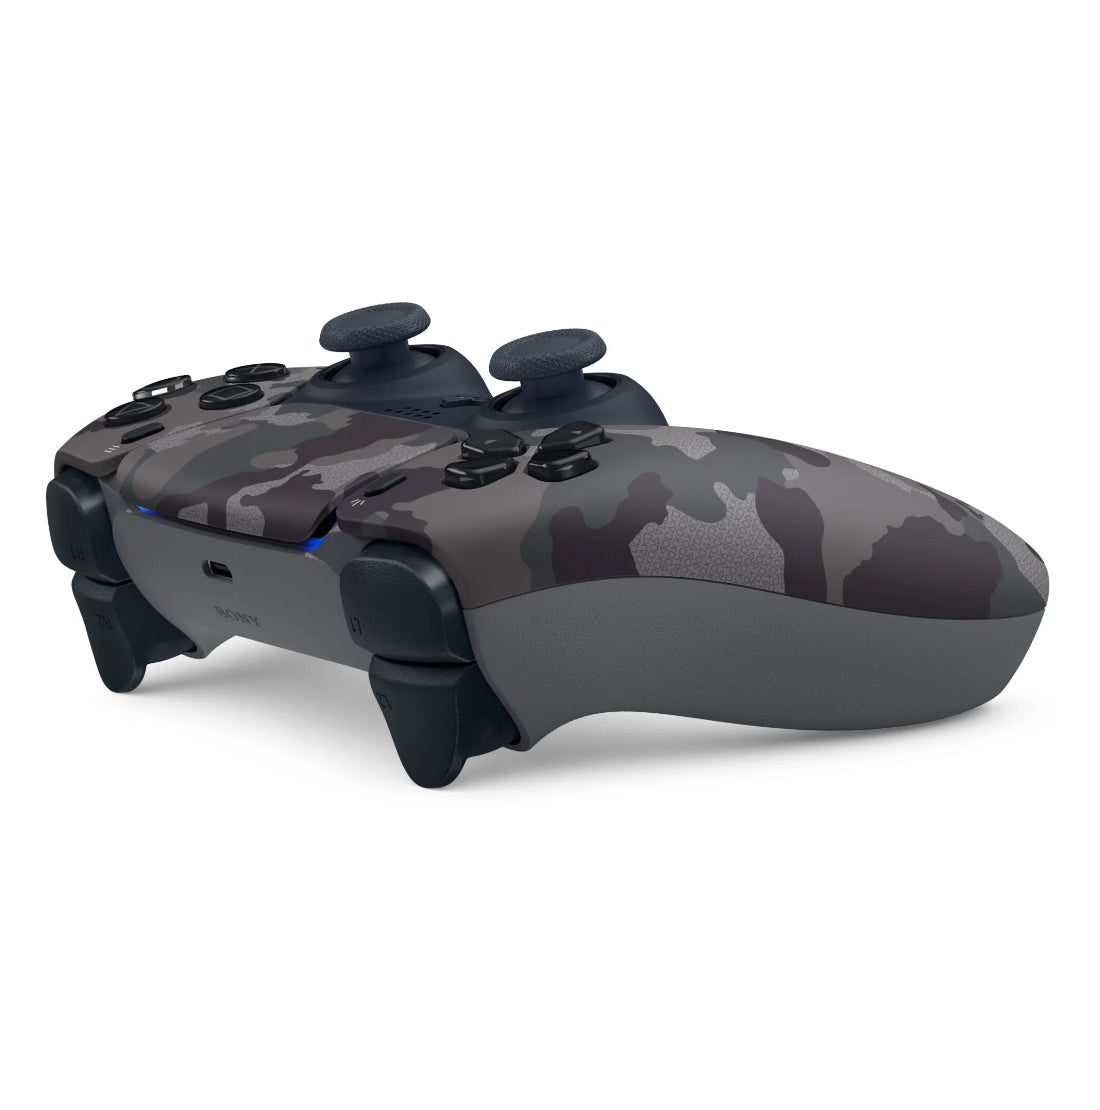 Sony Playstation 5 Digital Edition with Extra Gray Camo Controller and Play and Charge Kit Bundle - Pro-Distributing